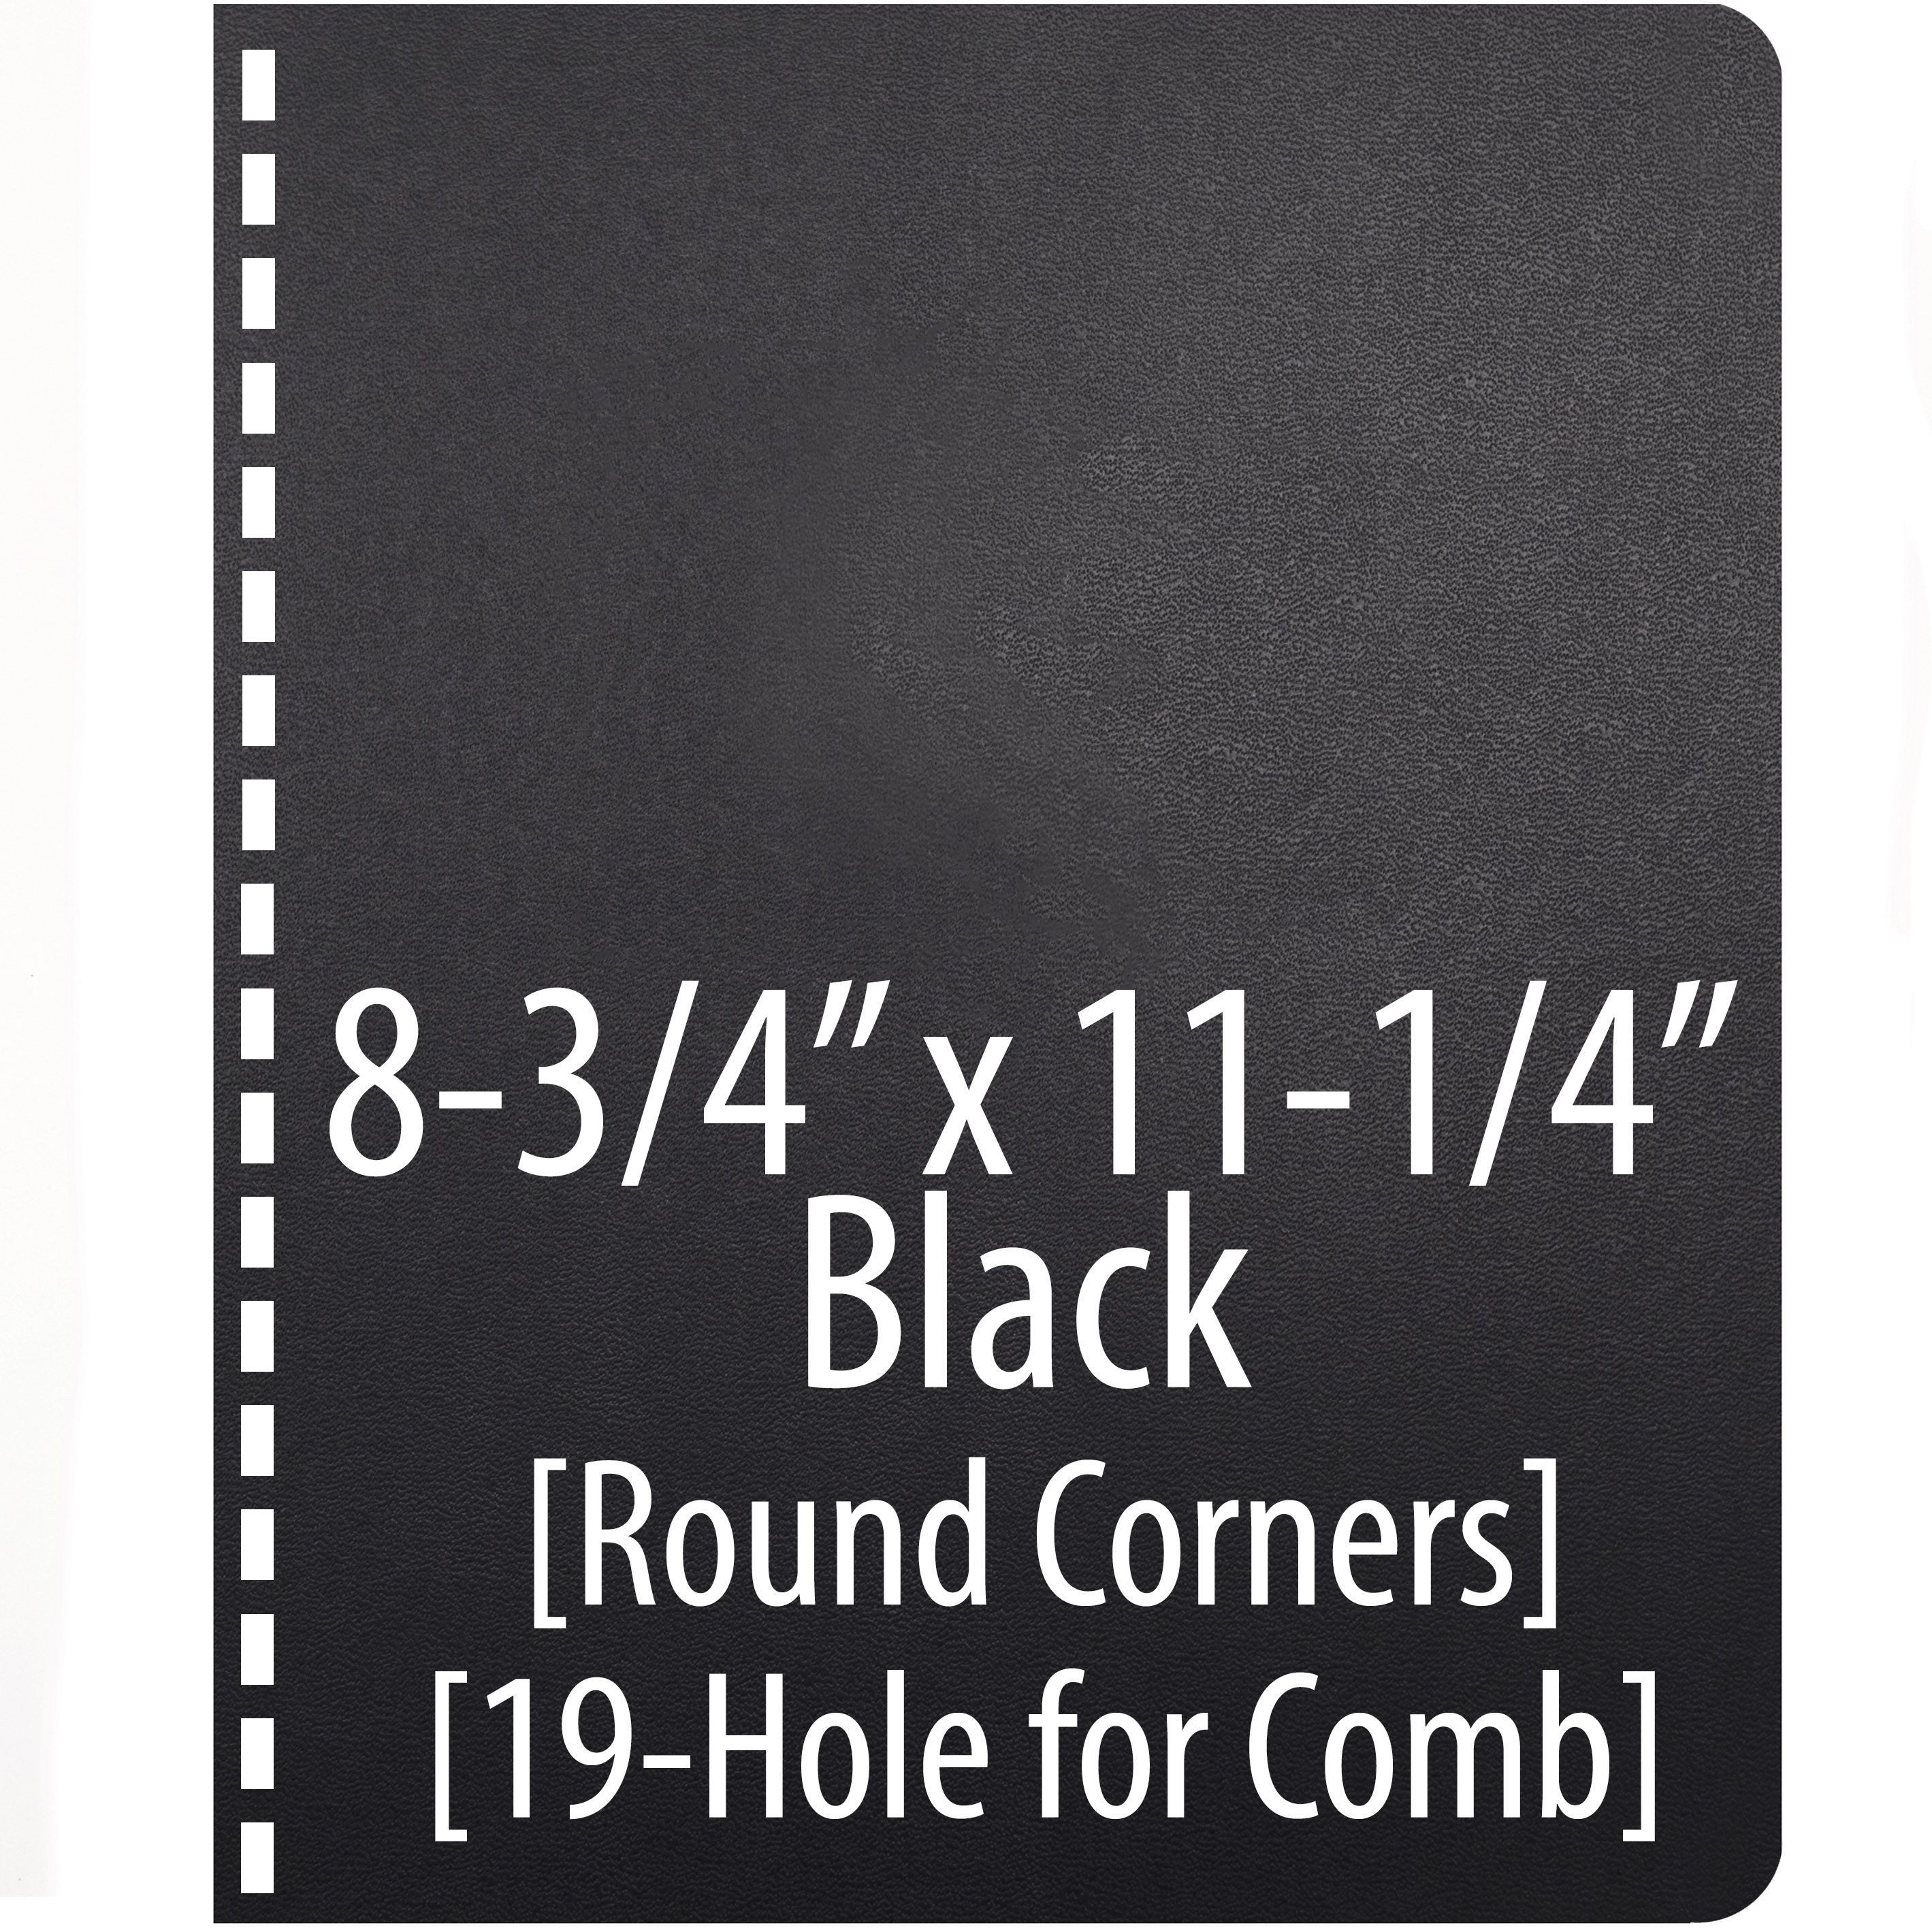 206 Composition Cover [No Window, Round Corner, Black, 19-hole Punch, 8-3/4" X 11-1/4"] 100 /Pack